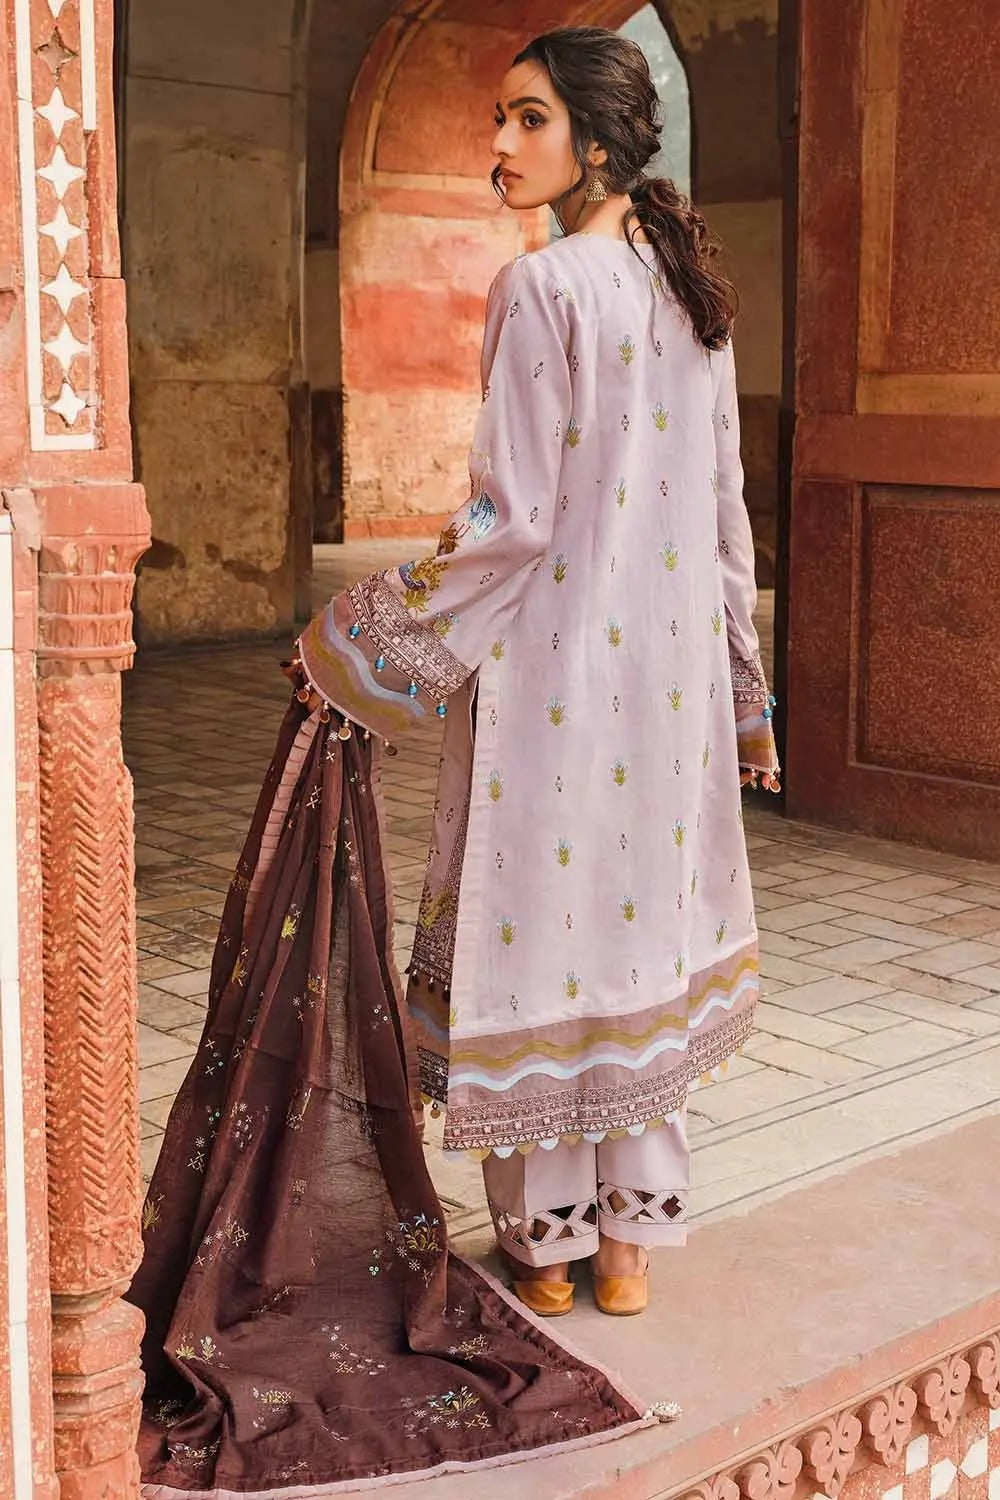 Gul Ahmed 3PC Unstitched Lawn Embroidered Suit with Paper Cotton Dupatta FE-12013